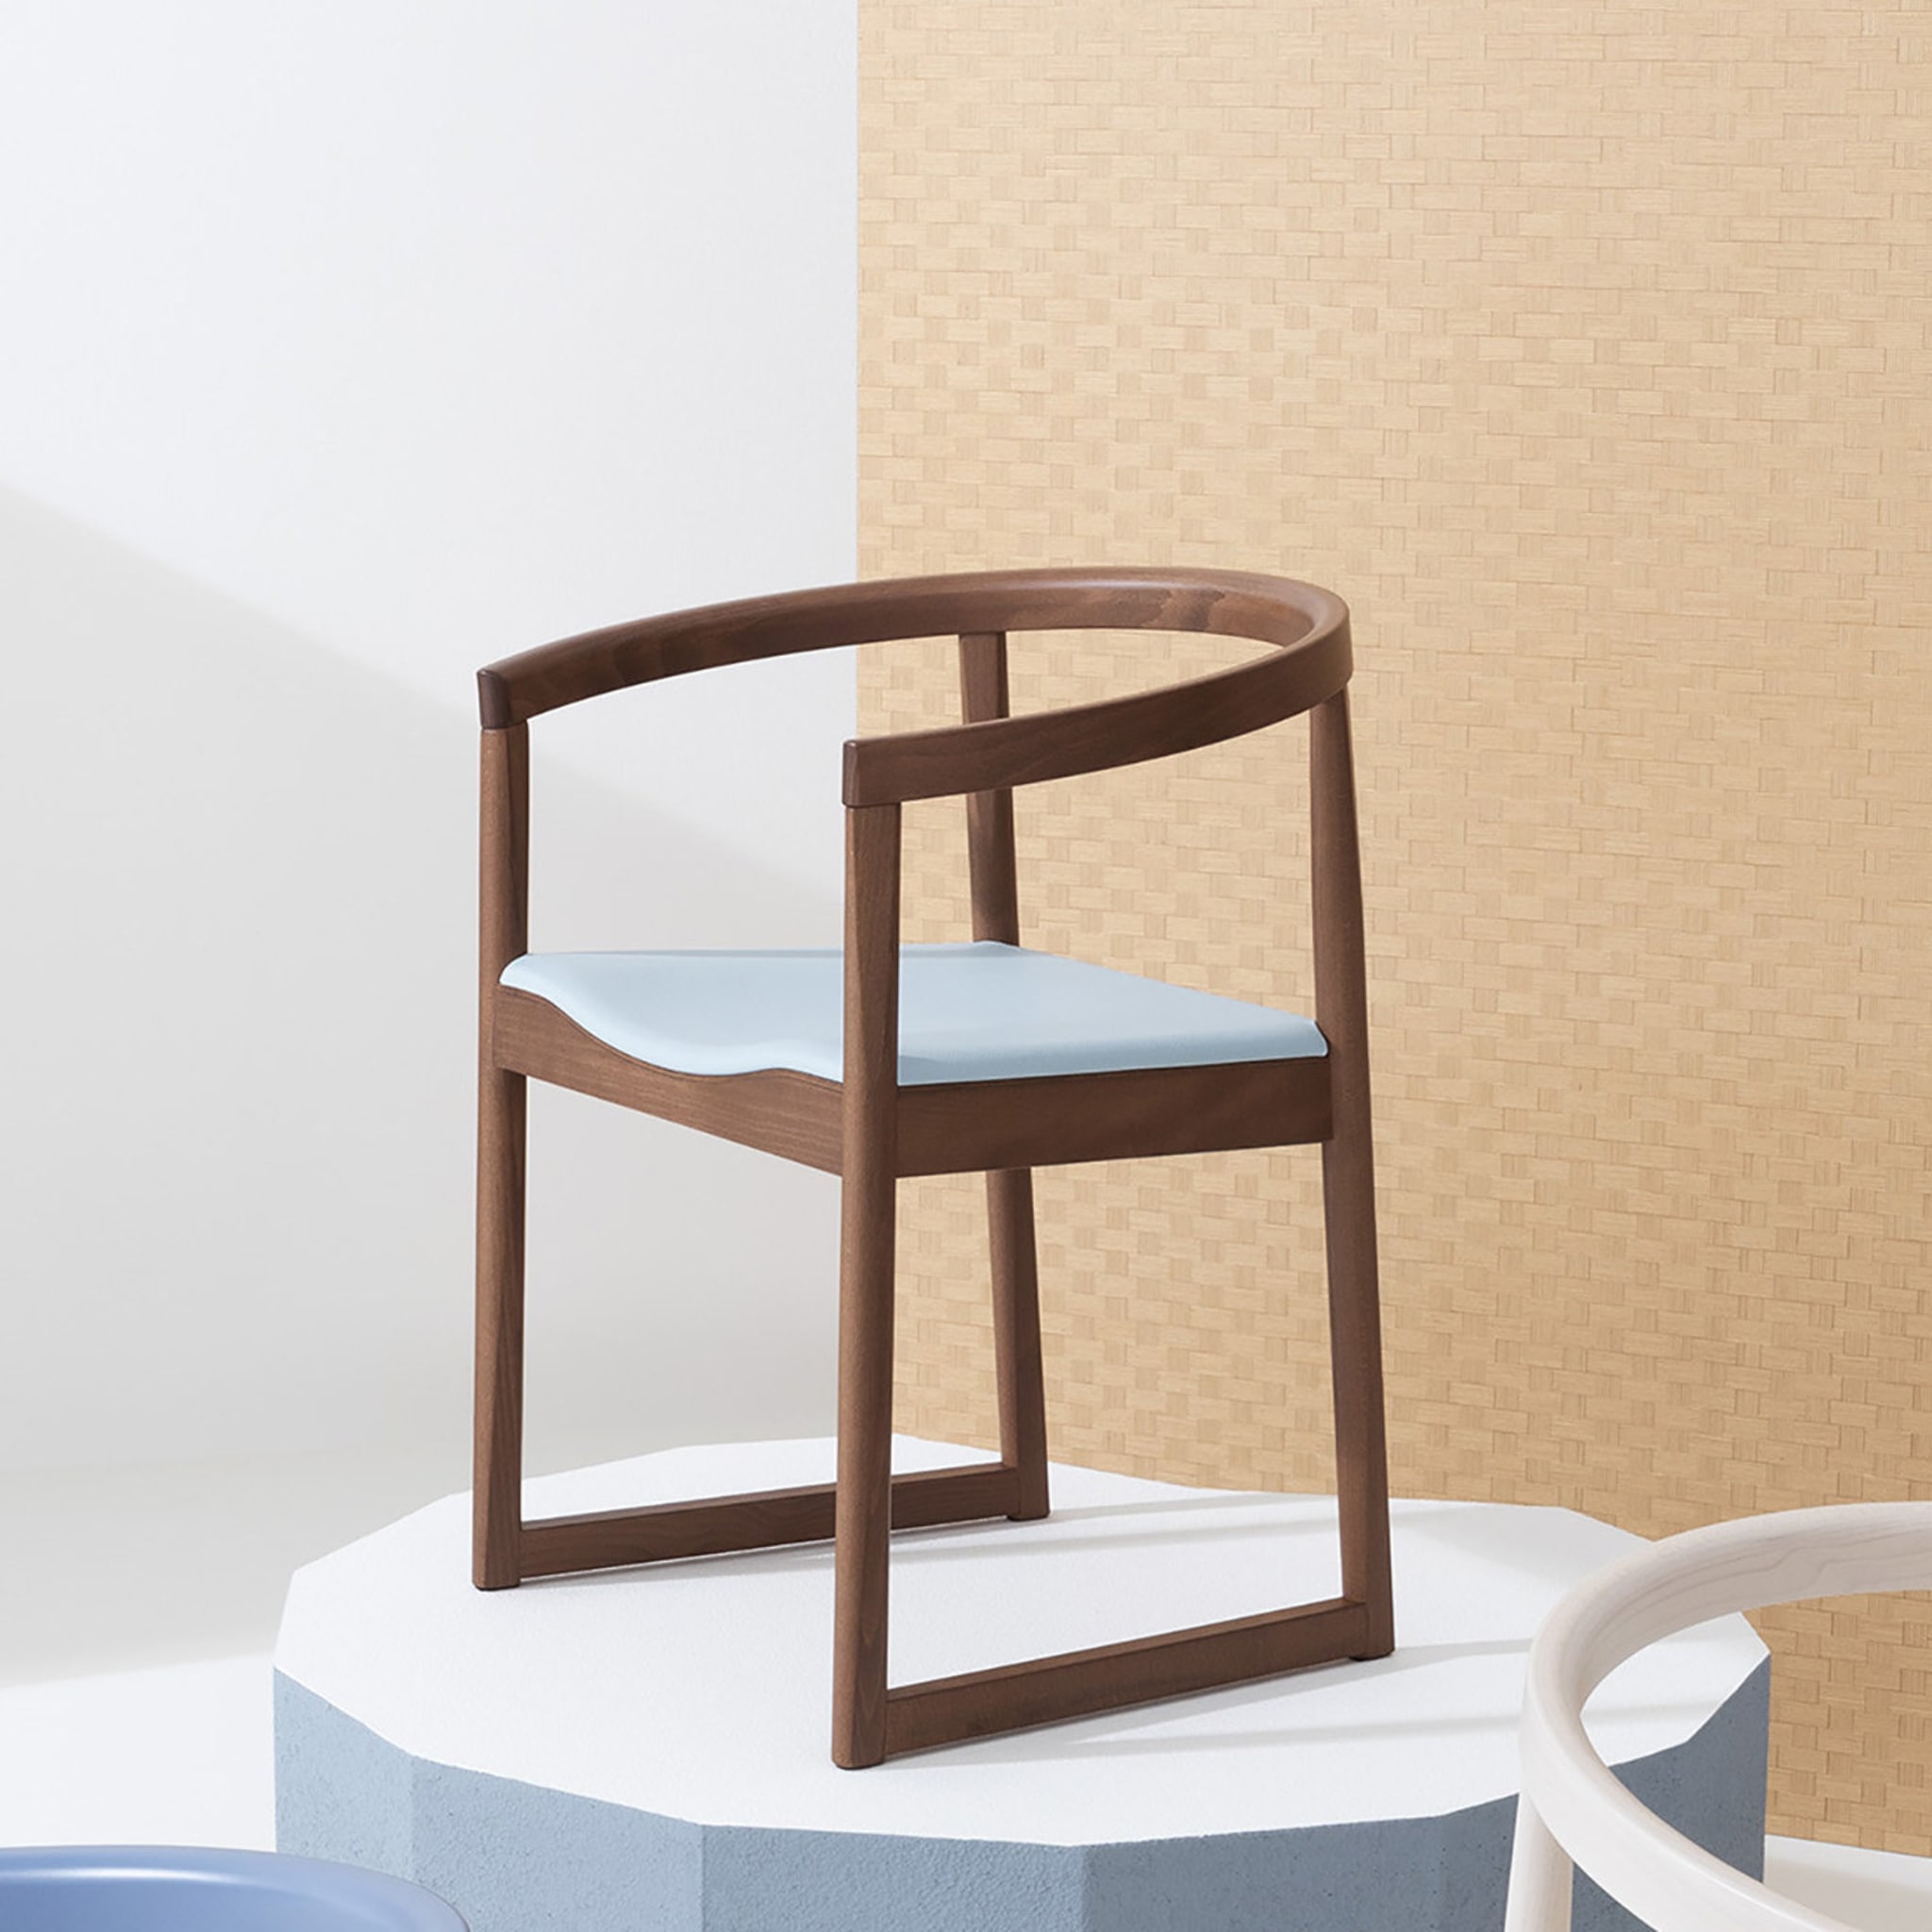 Nordica 601 Brown Chair by Marco Ferreri - Alternative view 1